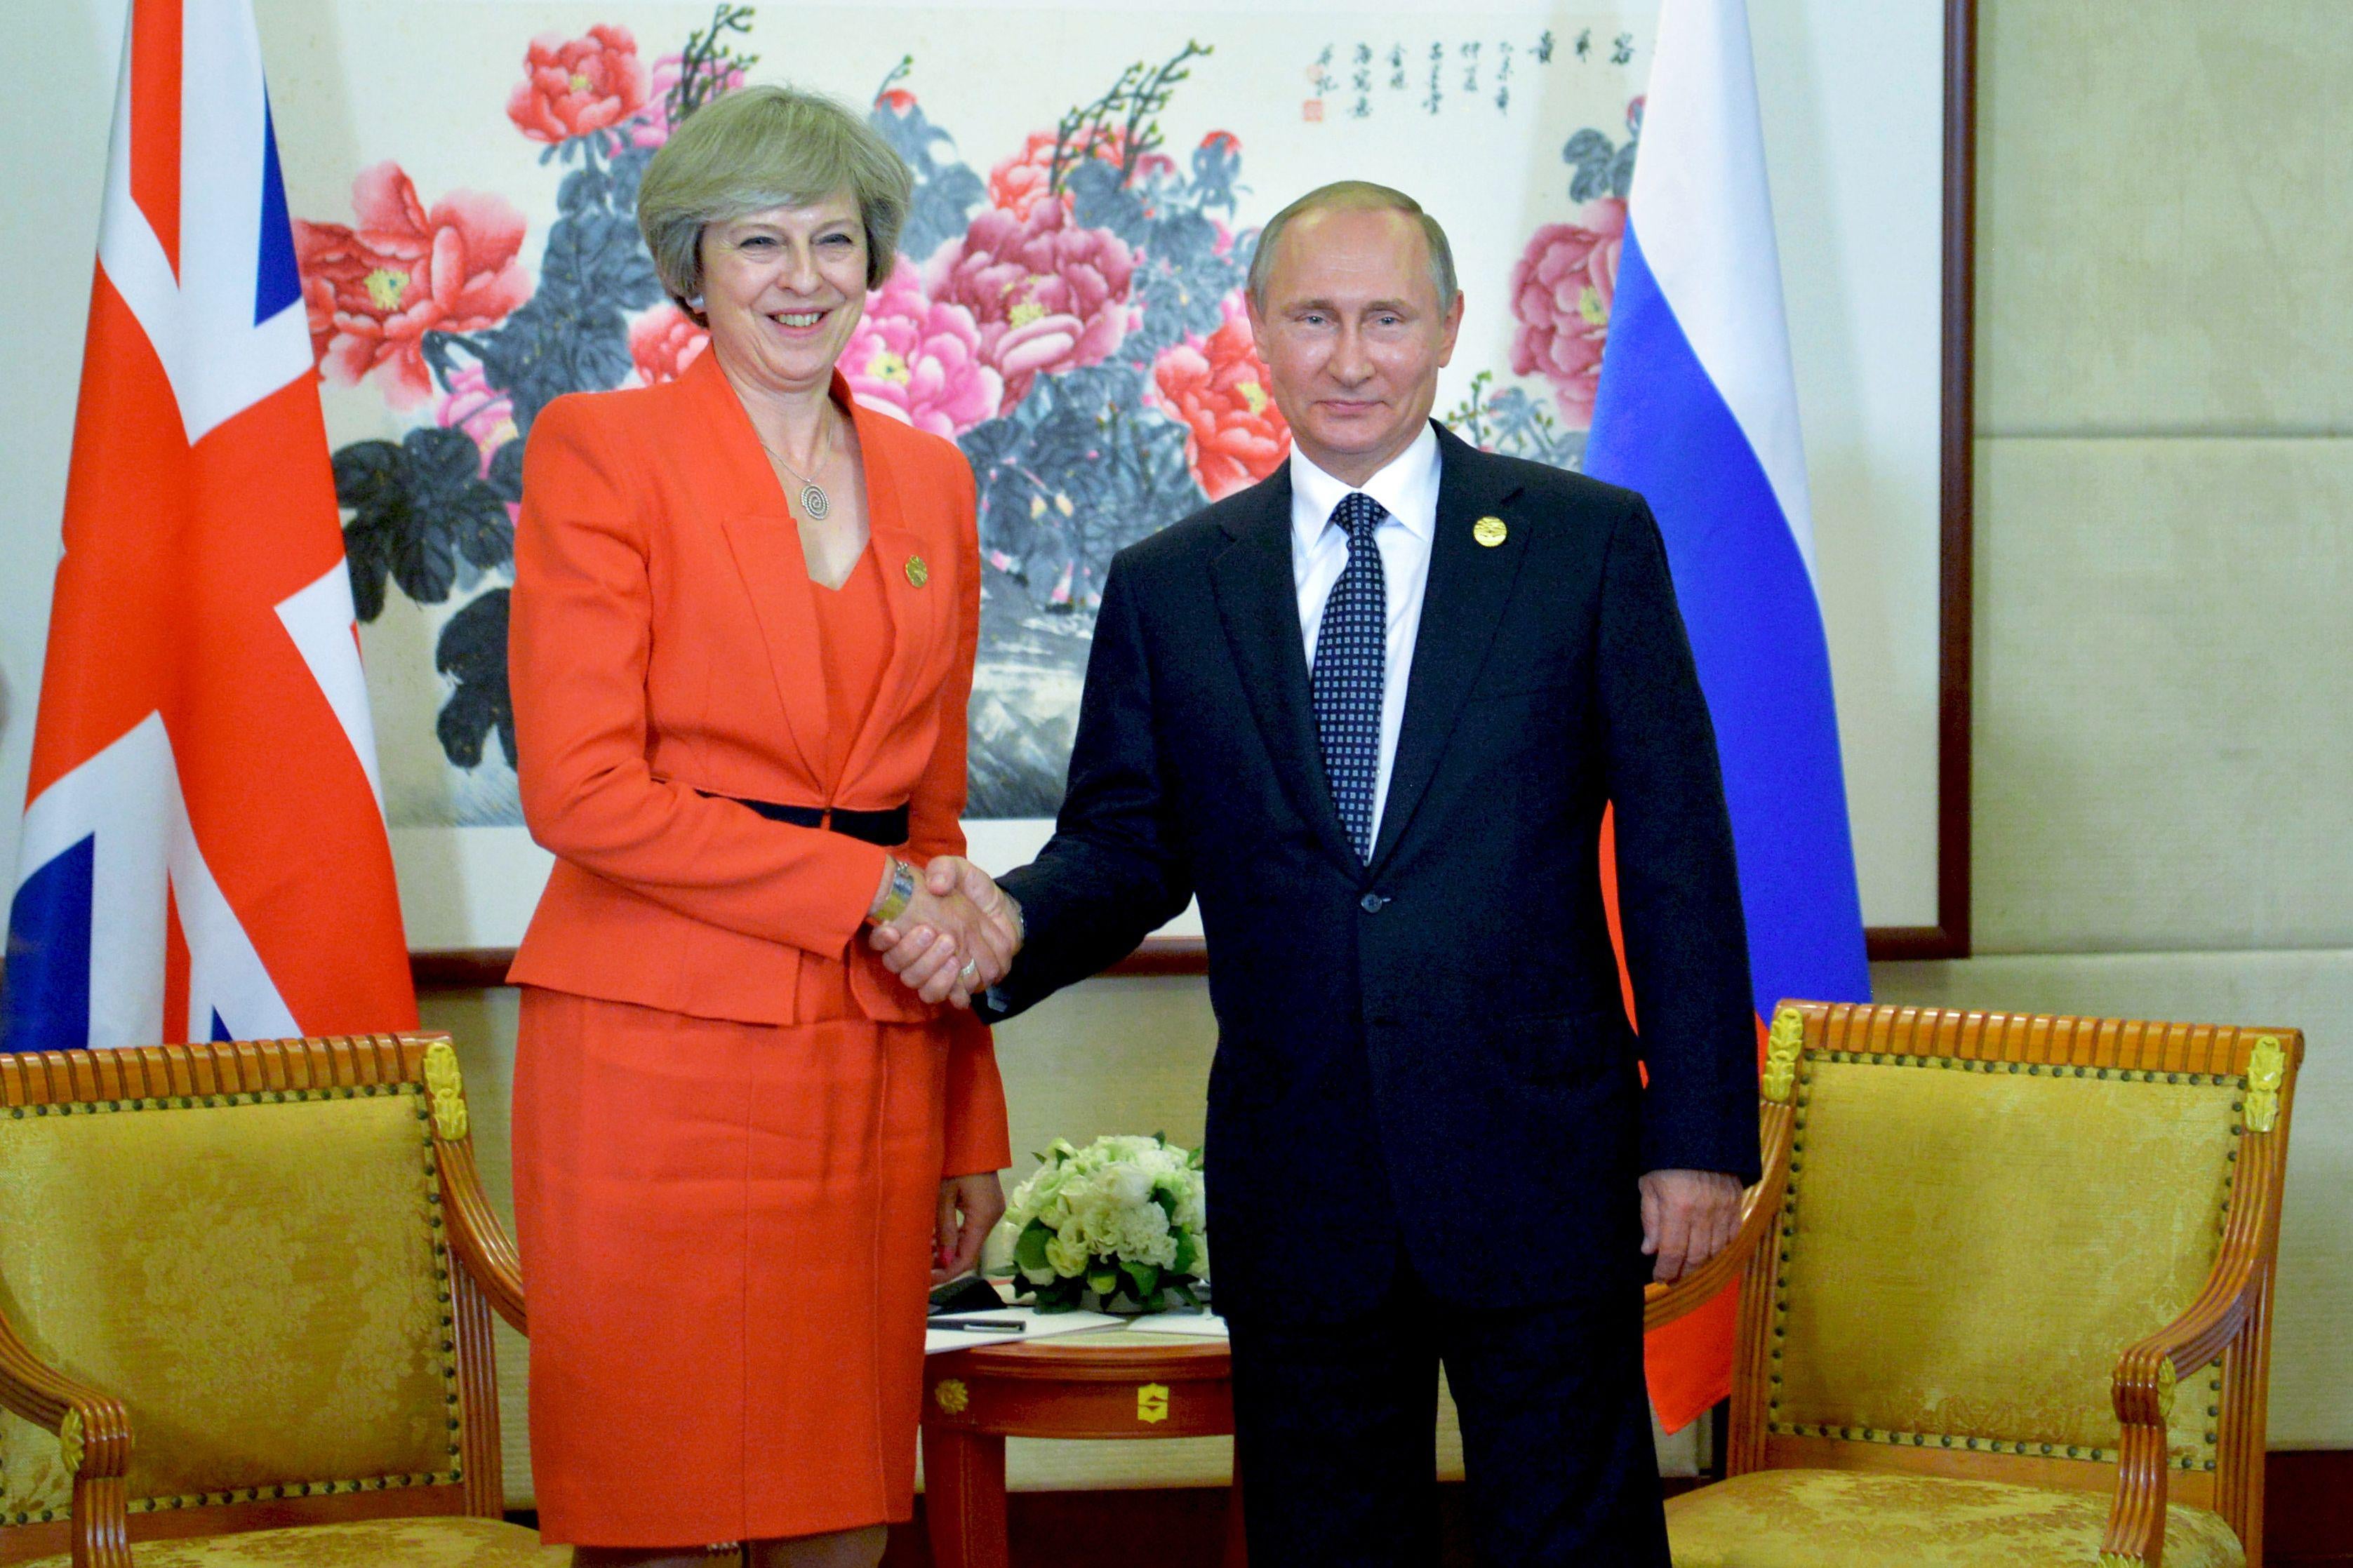 Russian President Vladimir Putin (R) meets with Britain's Prime Minister Theresa May on the sidelines of the G20 Leaders Summit in Hangzhou on September 4, 2016. / AFP / SPUTNIK / ALEXEI DRUZHININ        (Photo credit should read ALEXEI DRUZHININ/AFP/Getty Images)